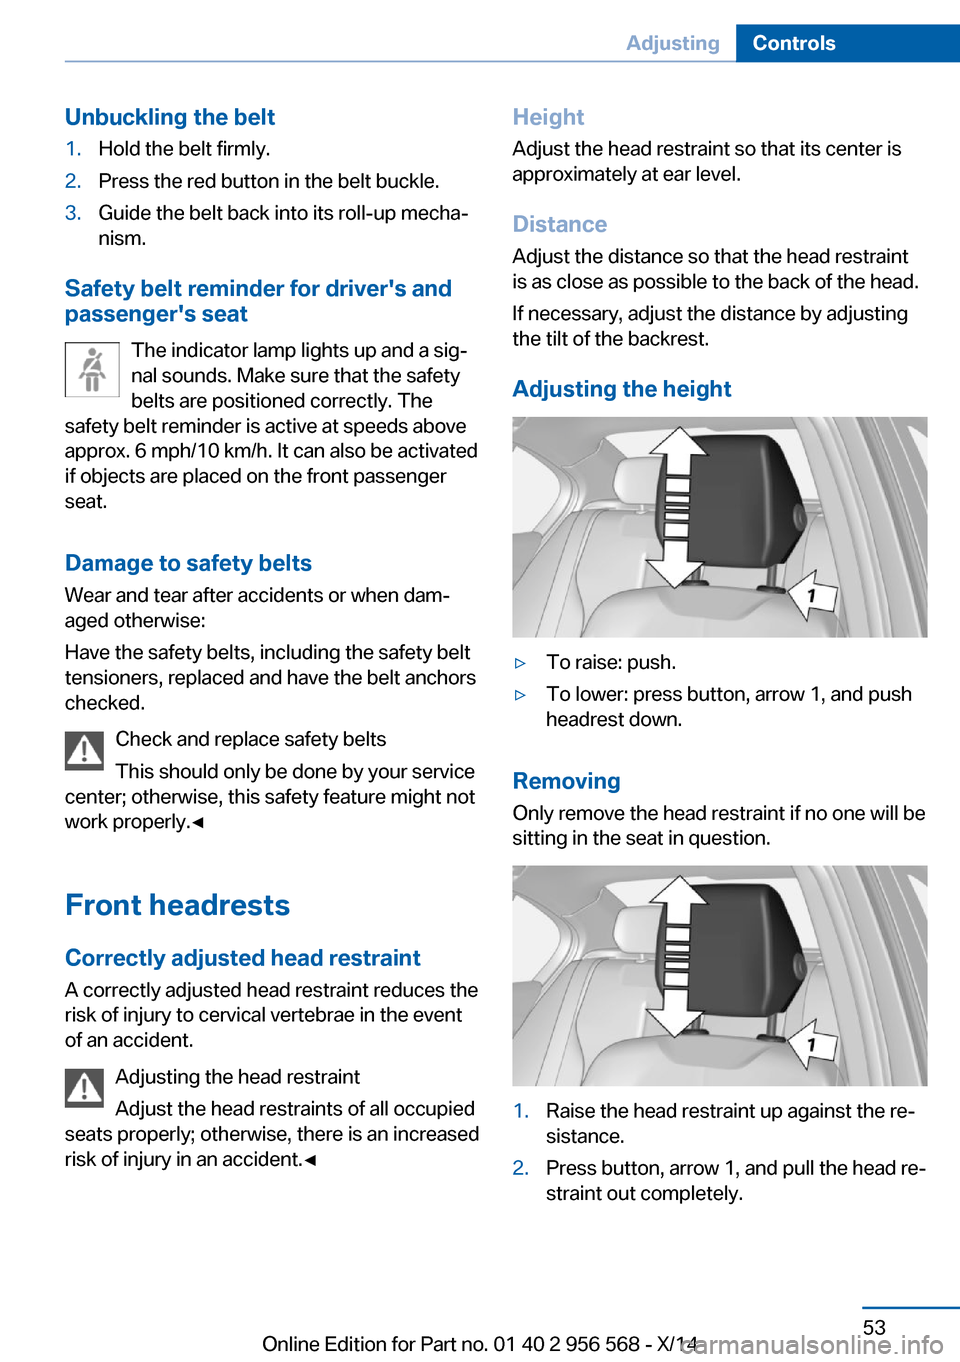 BMW 2 SERIES 2014 F22 Owners Manual Unbuckling the belt1.Hold the belt firmly.2.Press the red button in the belt buckle.3.Guide the belt back into its roll-up mecha‐
nism.
Safety belt reminder for drivers and
passengers seat
The ind